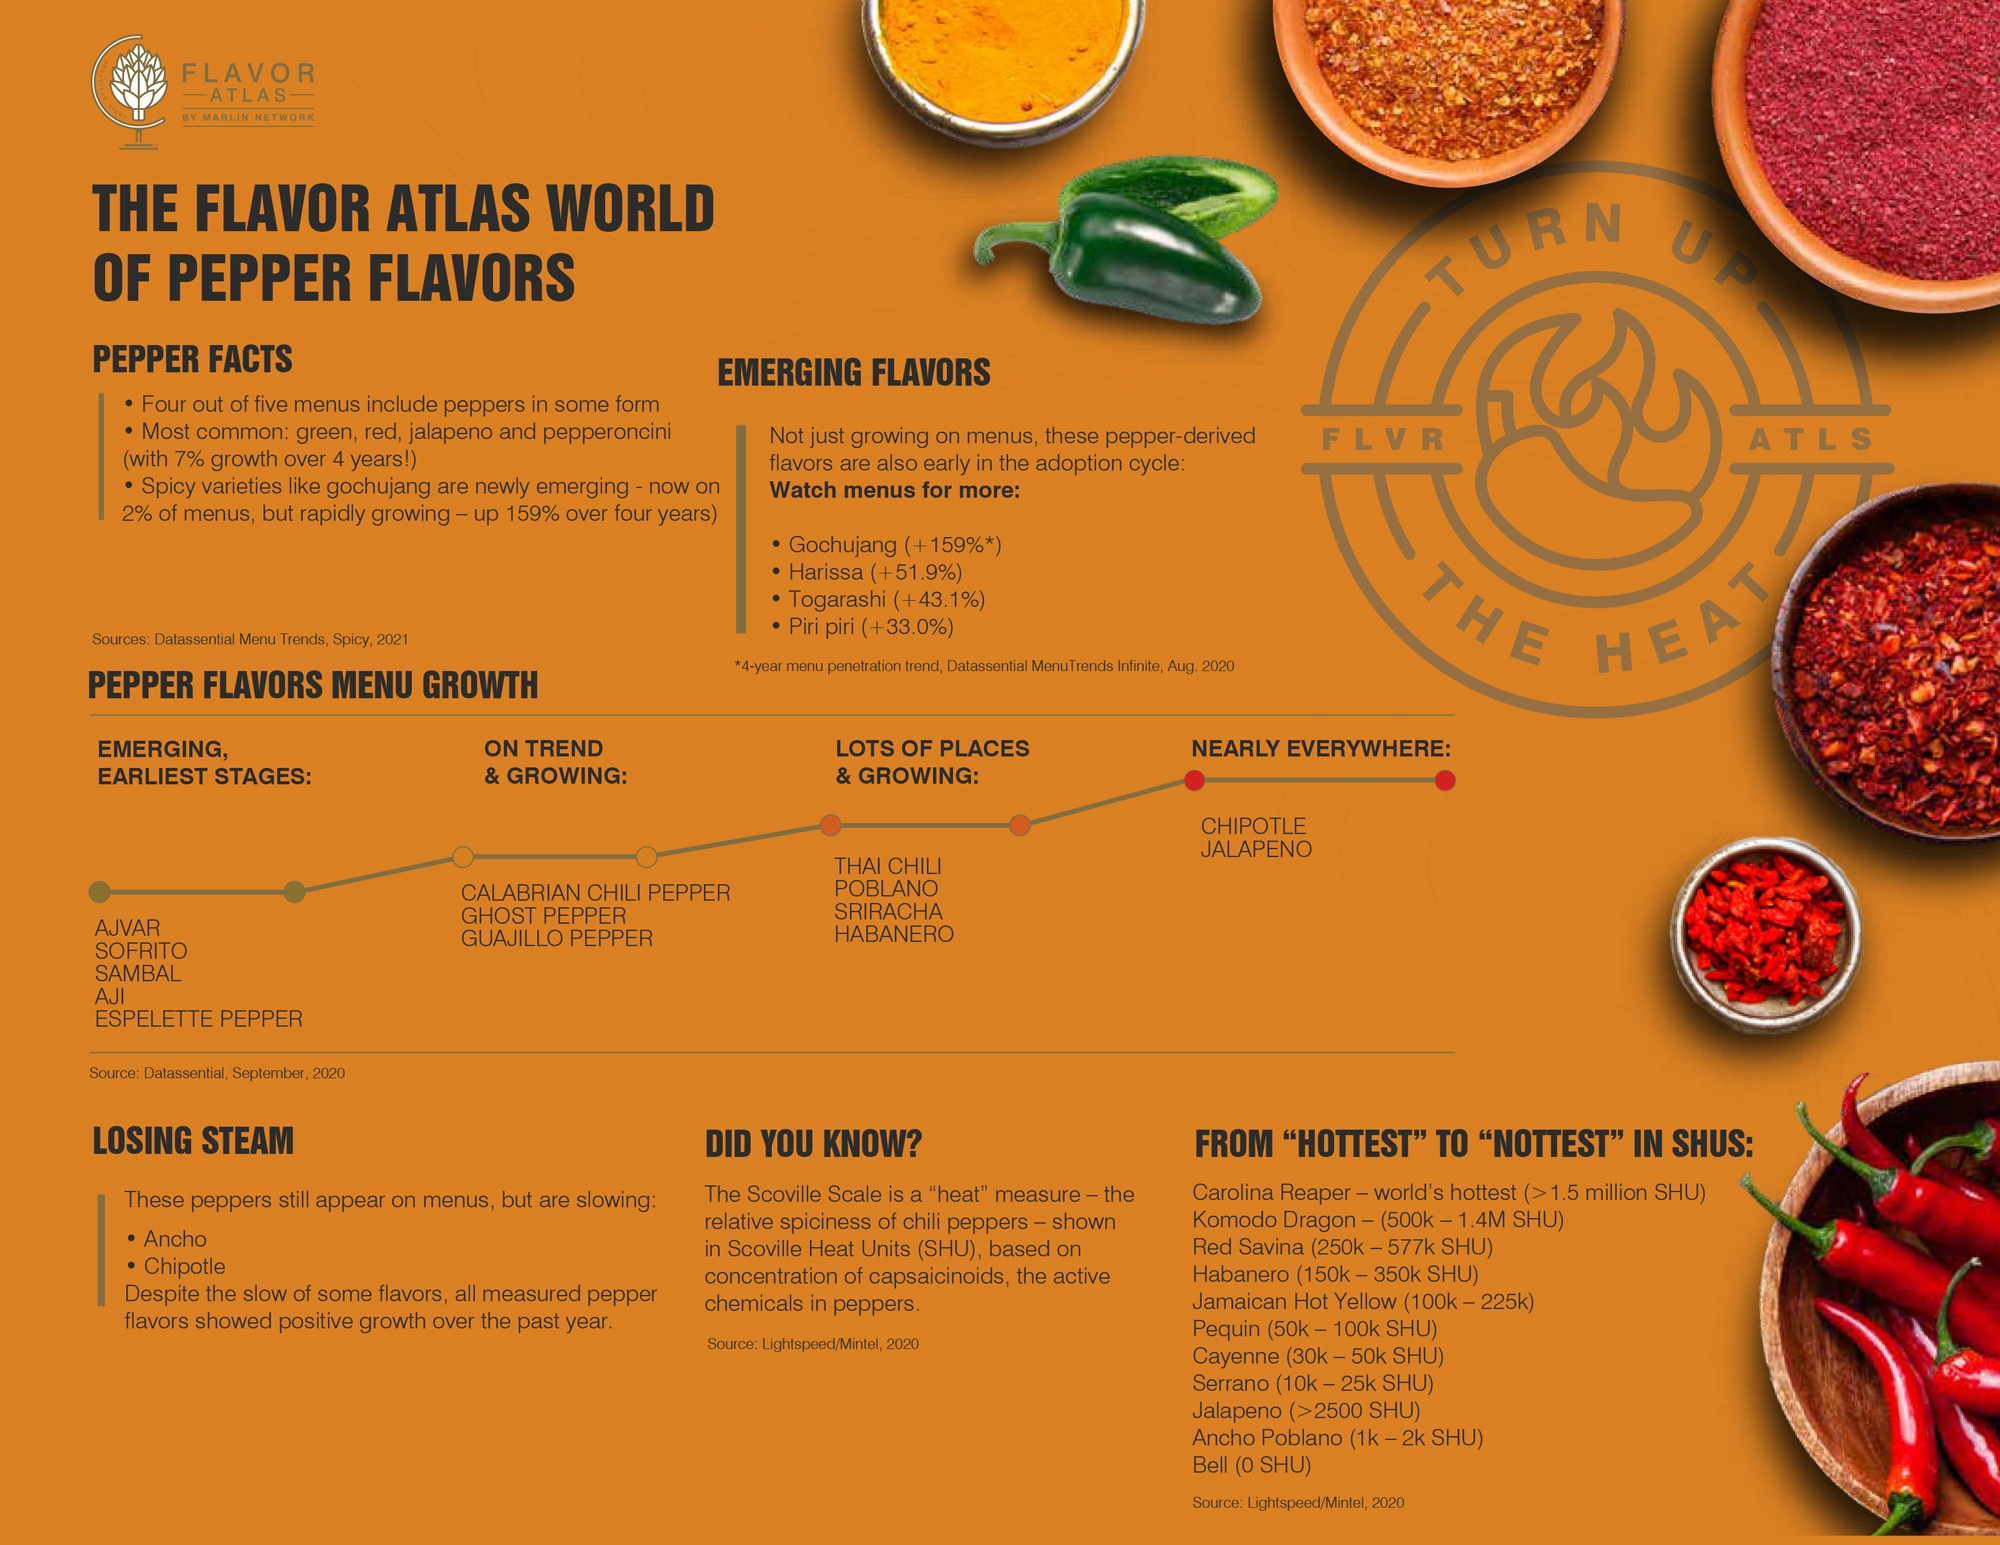 Flavor Atlas infogrpahic about peppers image